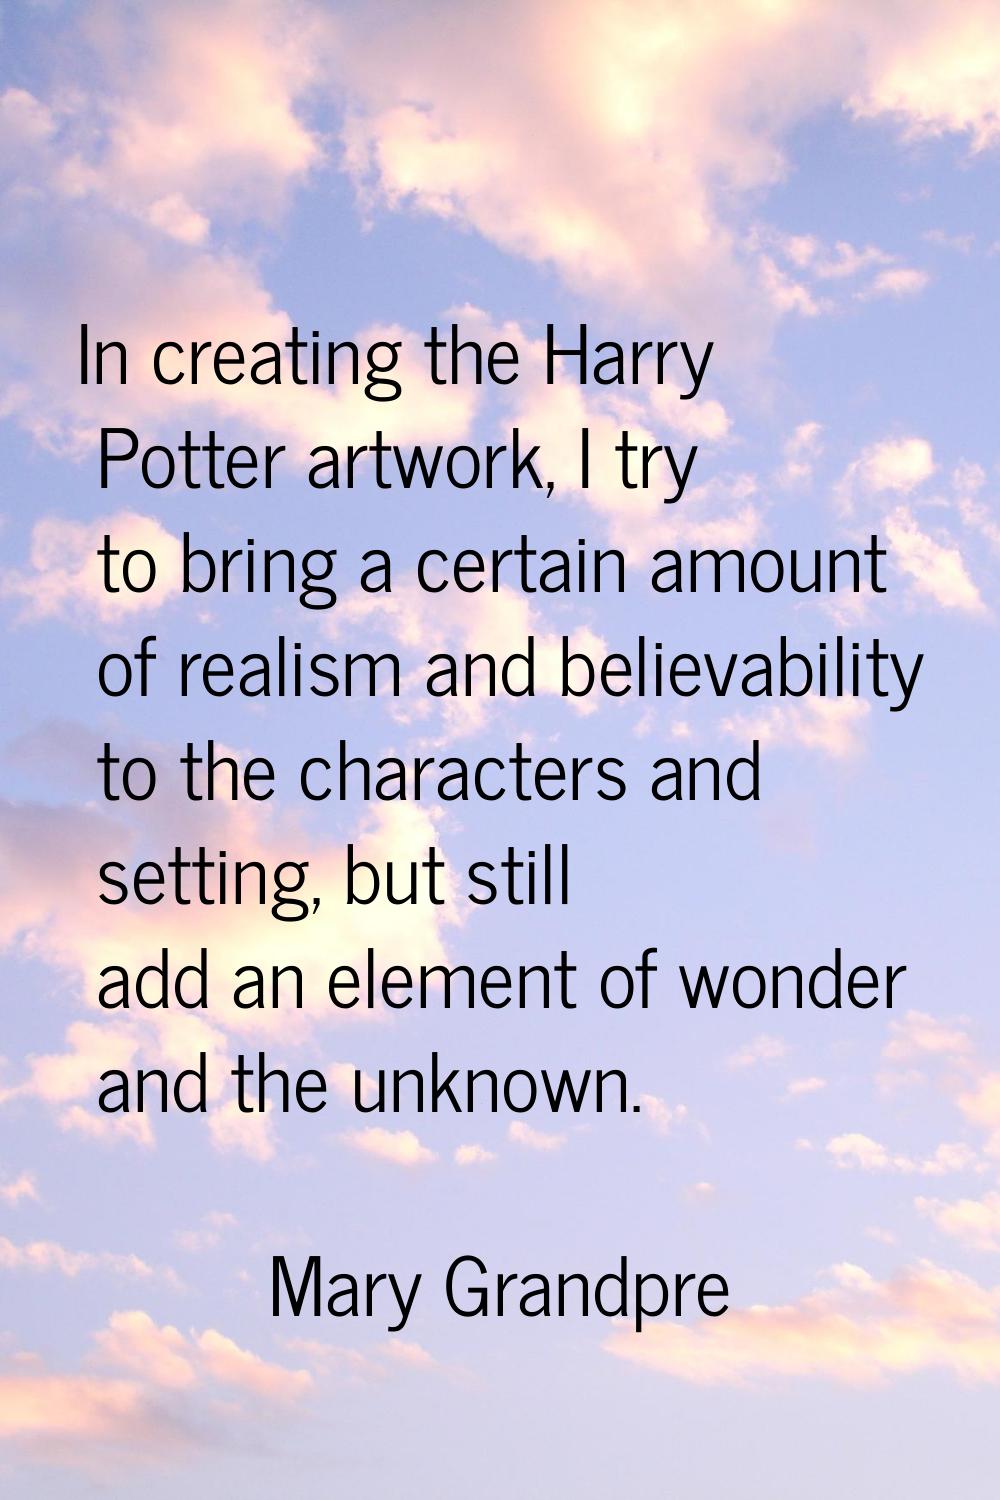 In creating the Harry Potter artwork, I try to bring a certain amount of realism and believability 